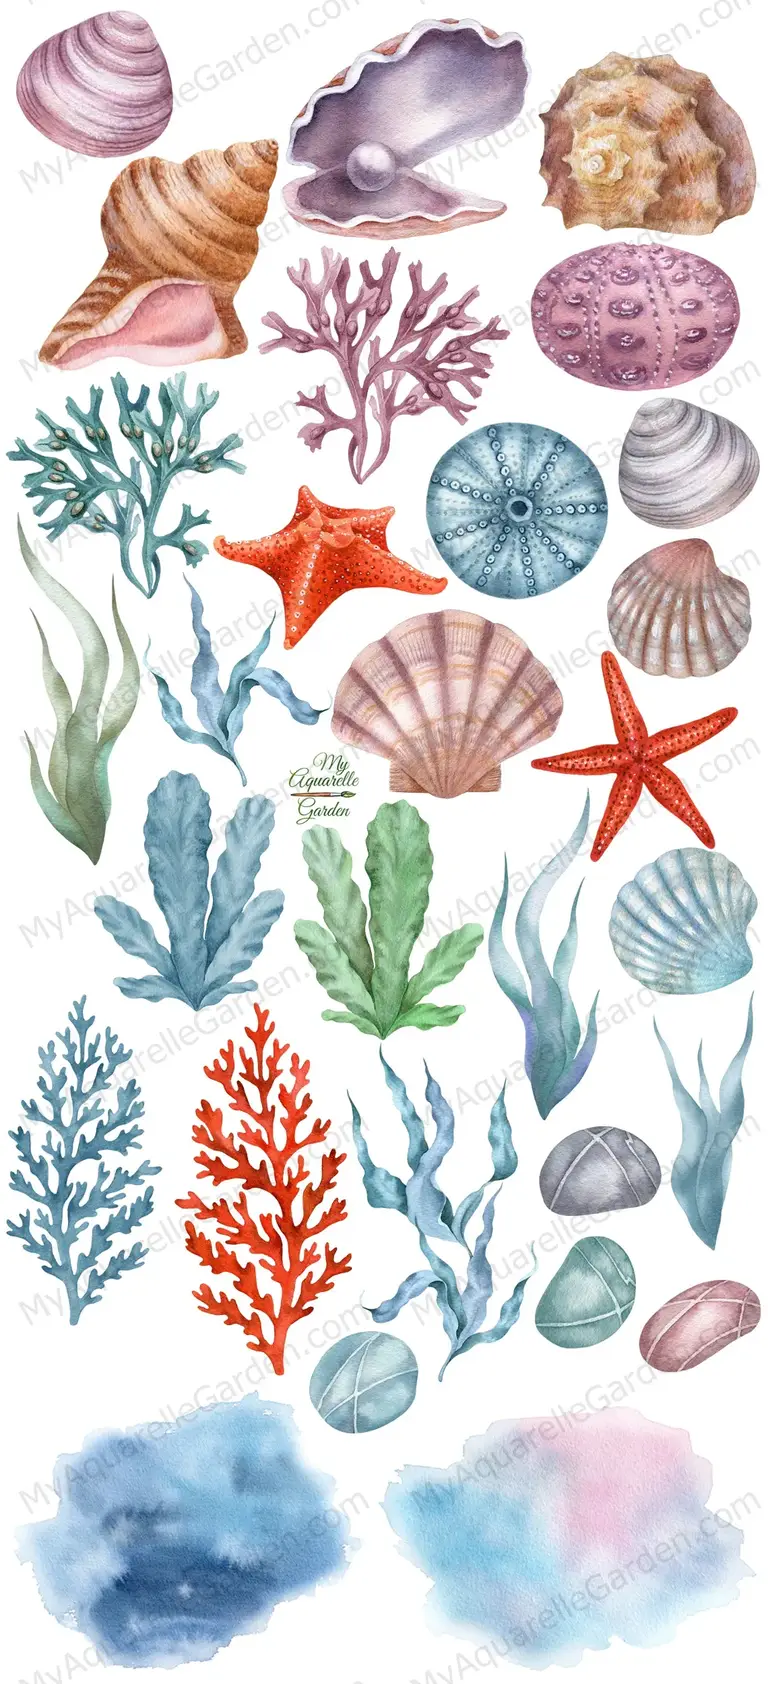 Ocean creatures. Under the sea. Corals, seashells, starfishes, pebbles, seaweed, pearl. Watercolor hand-painted clip art. 